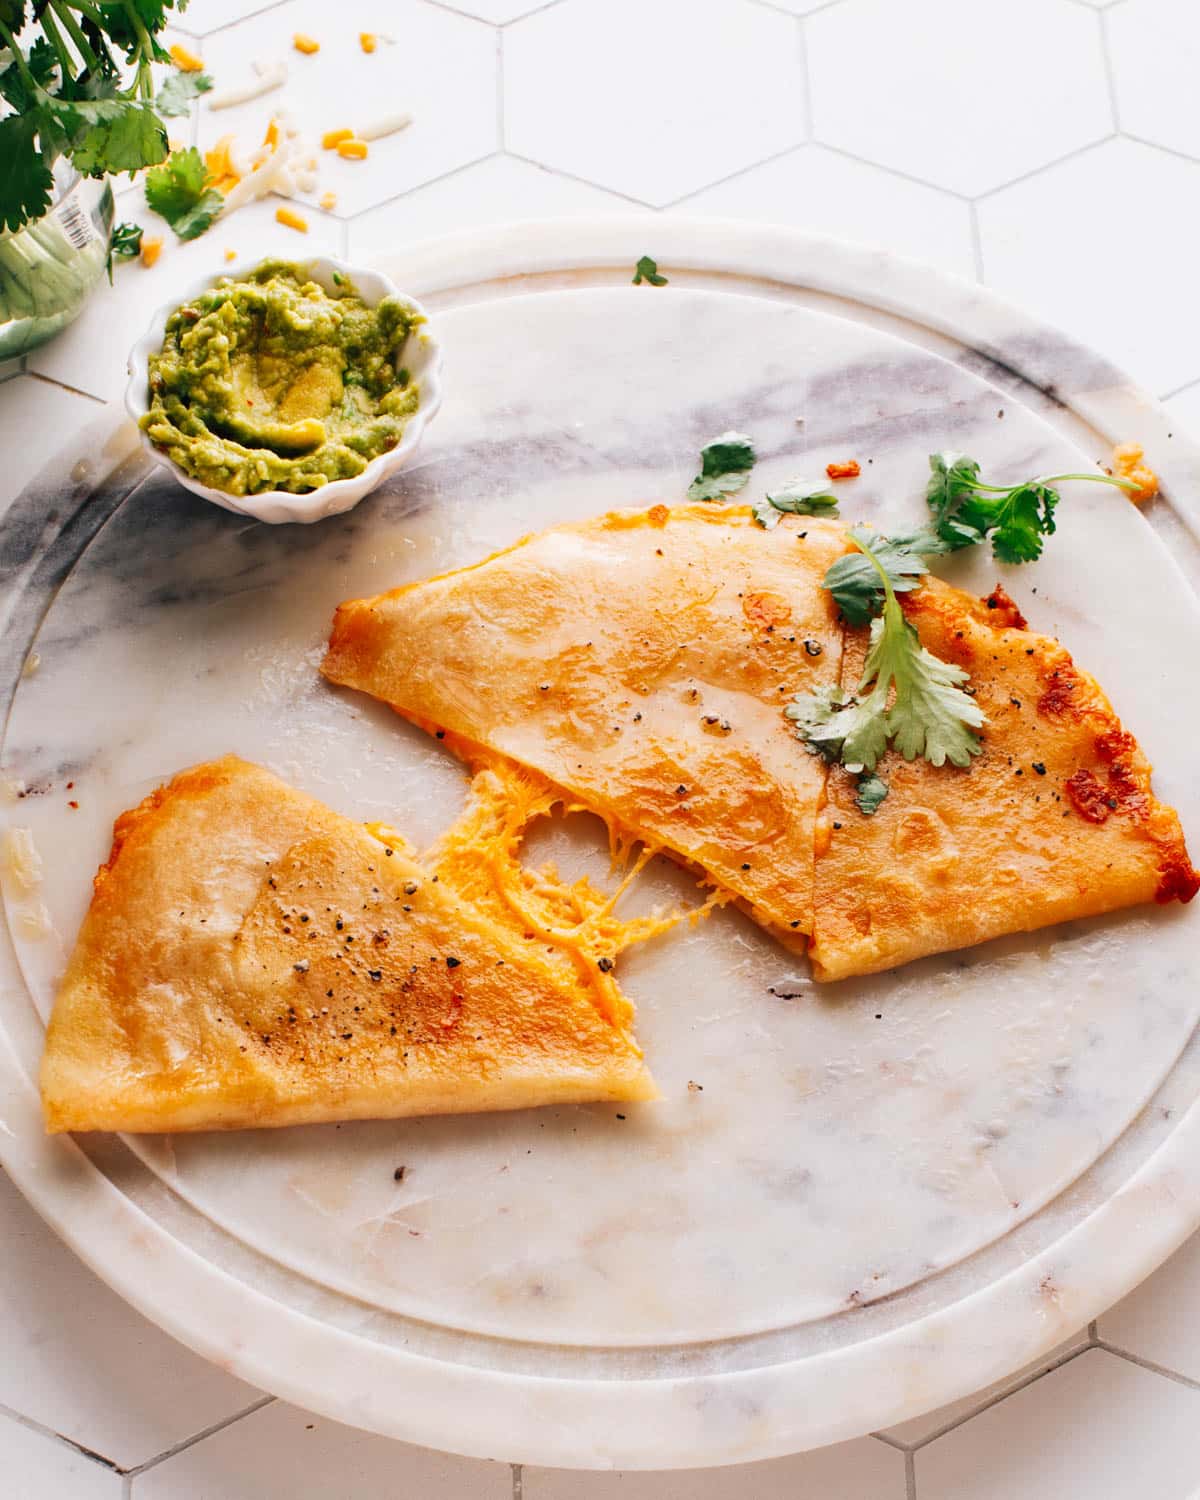 Wedges of cheese quesadillas, accompanied by a small cup of avocado crema.